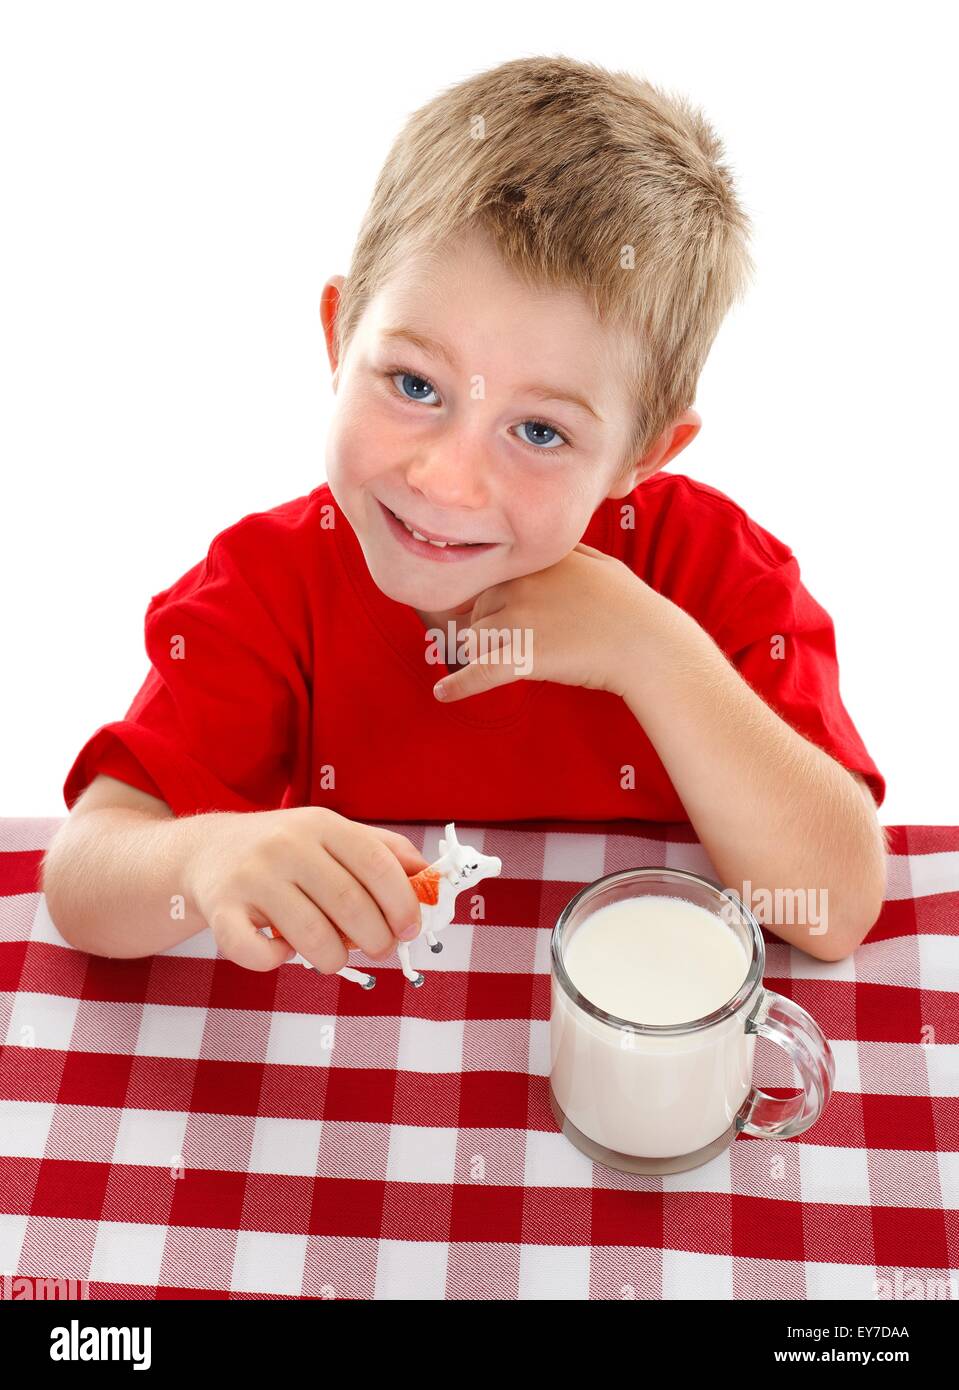 Cheerful young boy looking up, holding toy cow beside big glass cup of milk Stock Photo